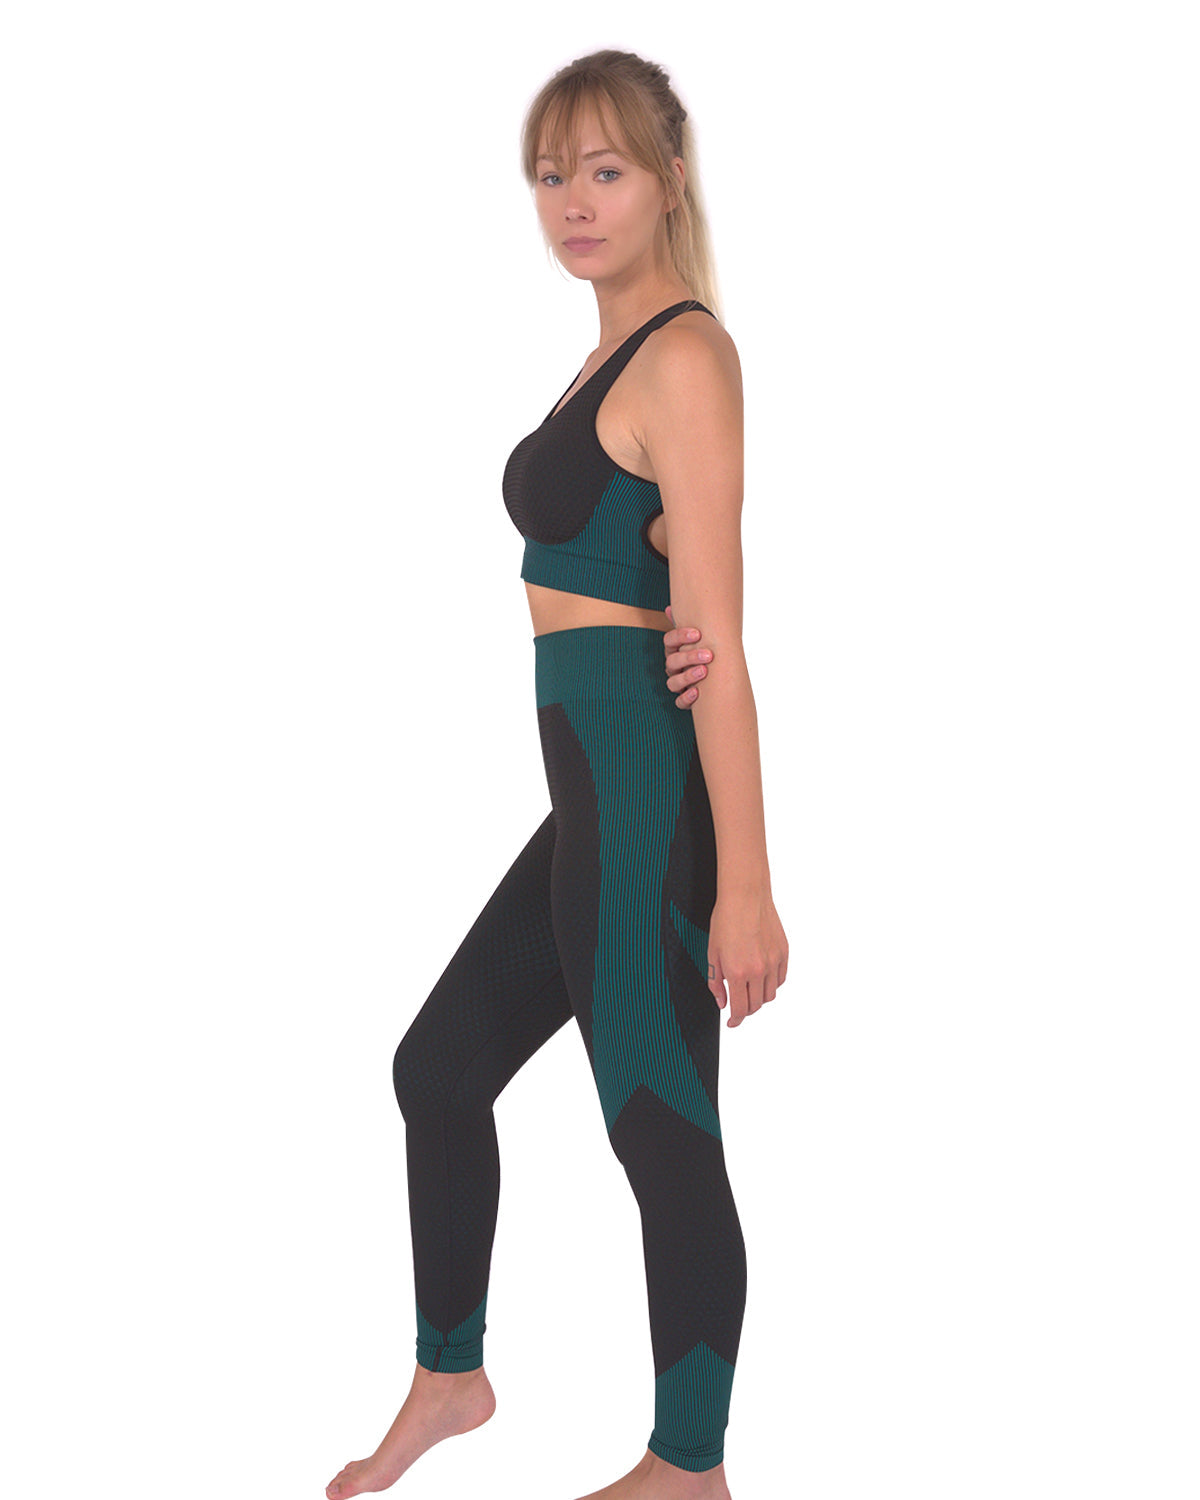 Trois Seamless Sports Bra - Black with Teal Blue